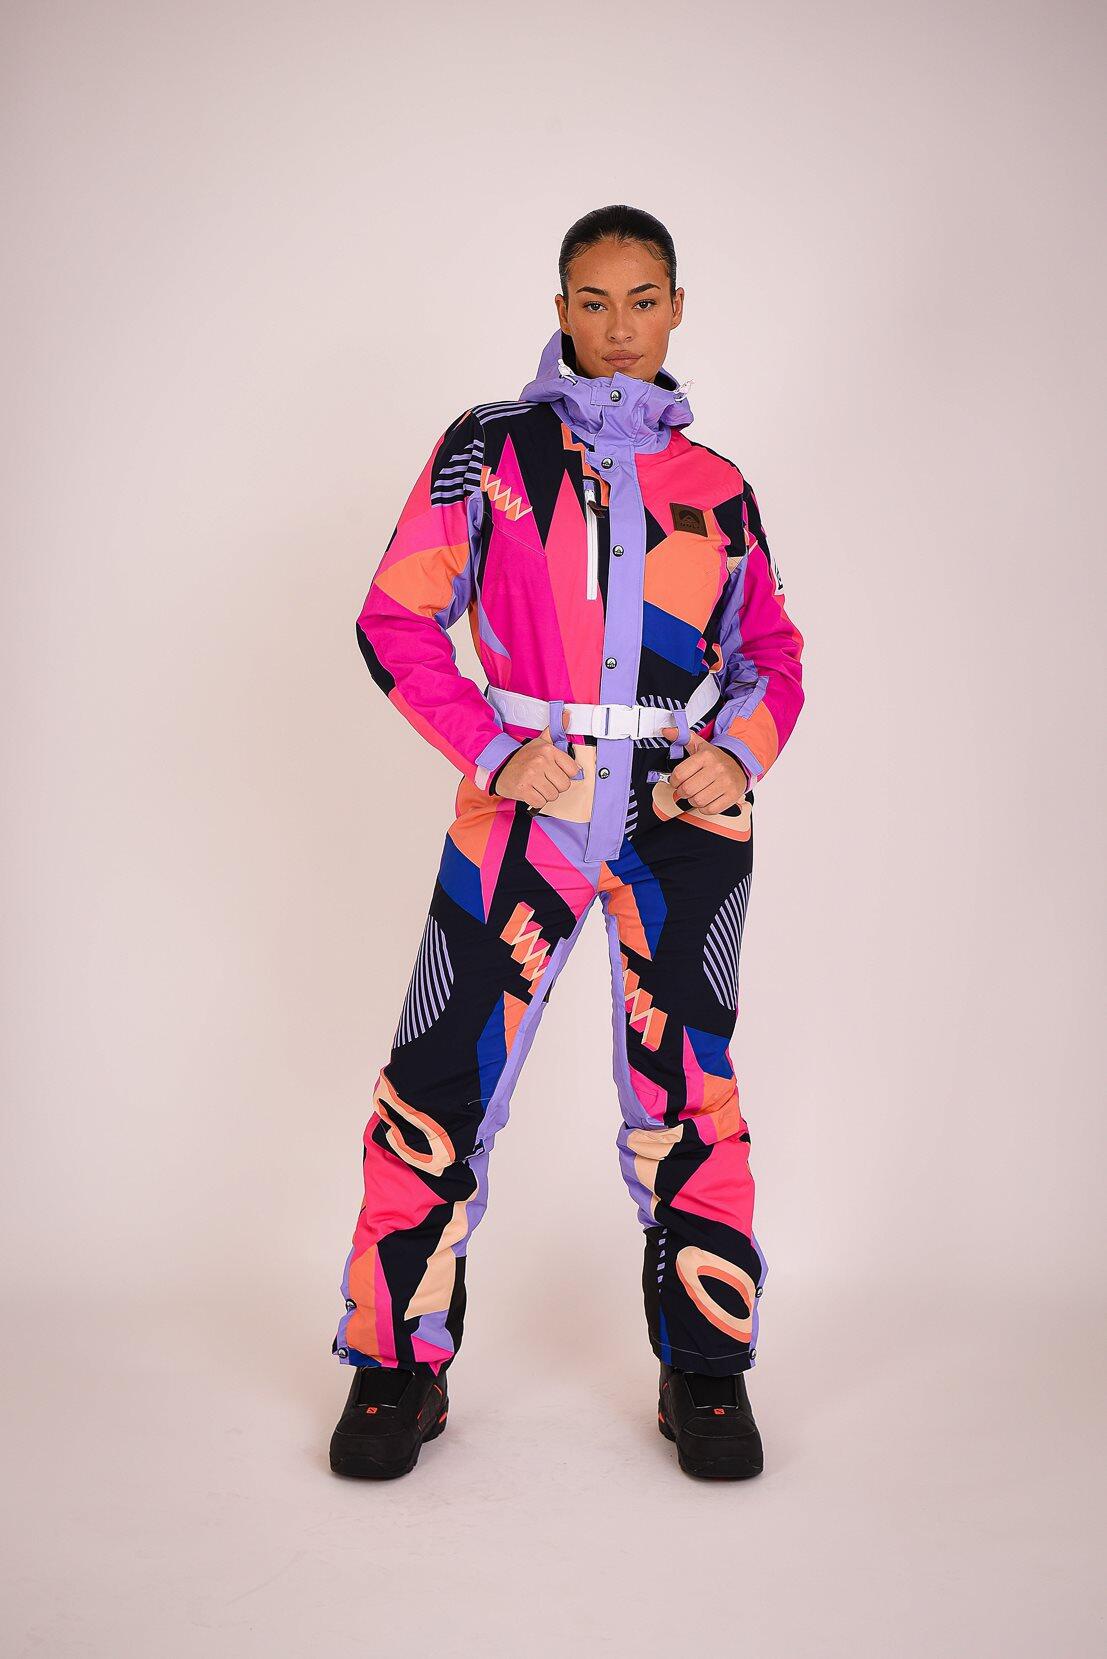 OOSC Hotstepper Curved Female Ski Suit